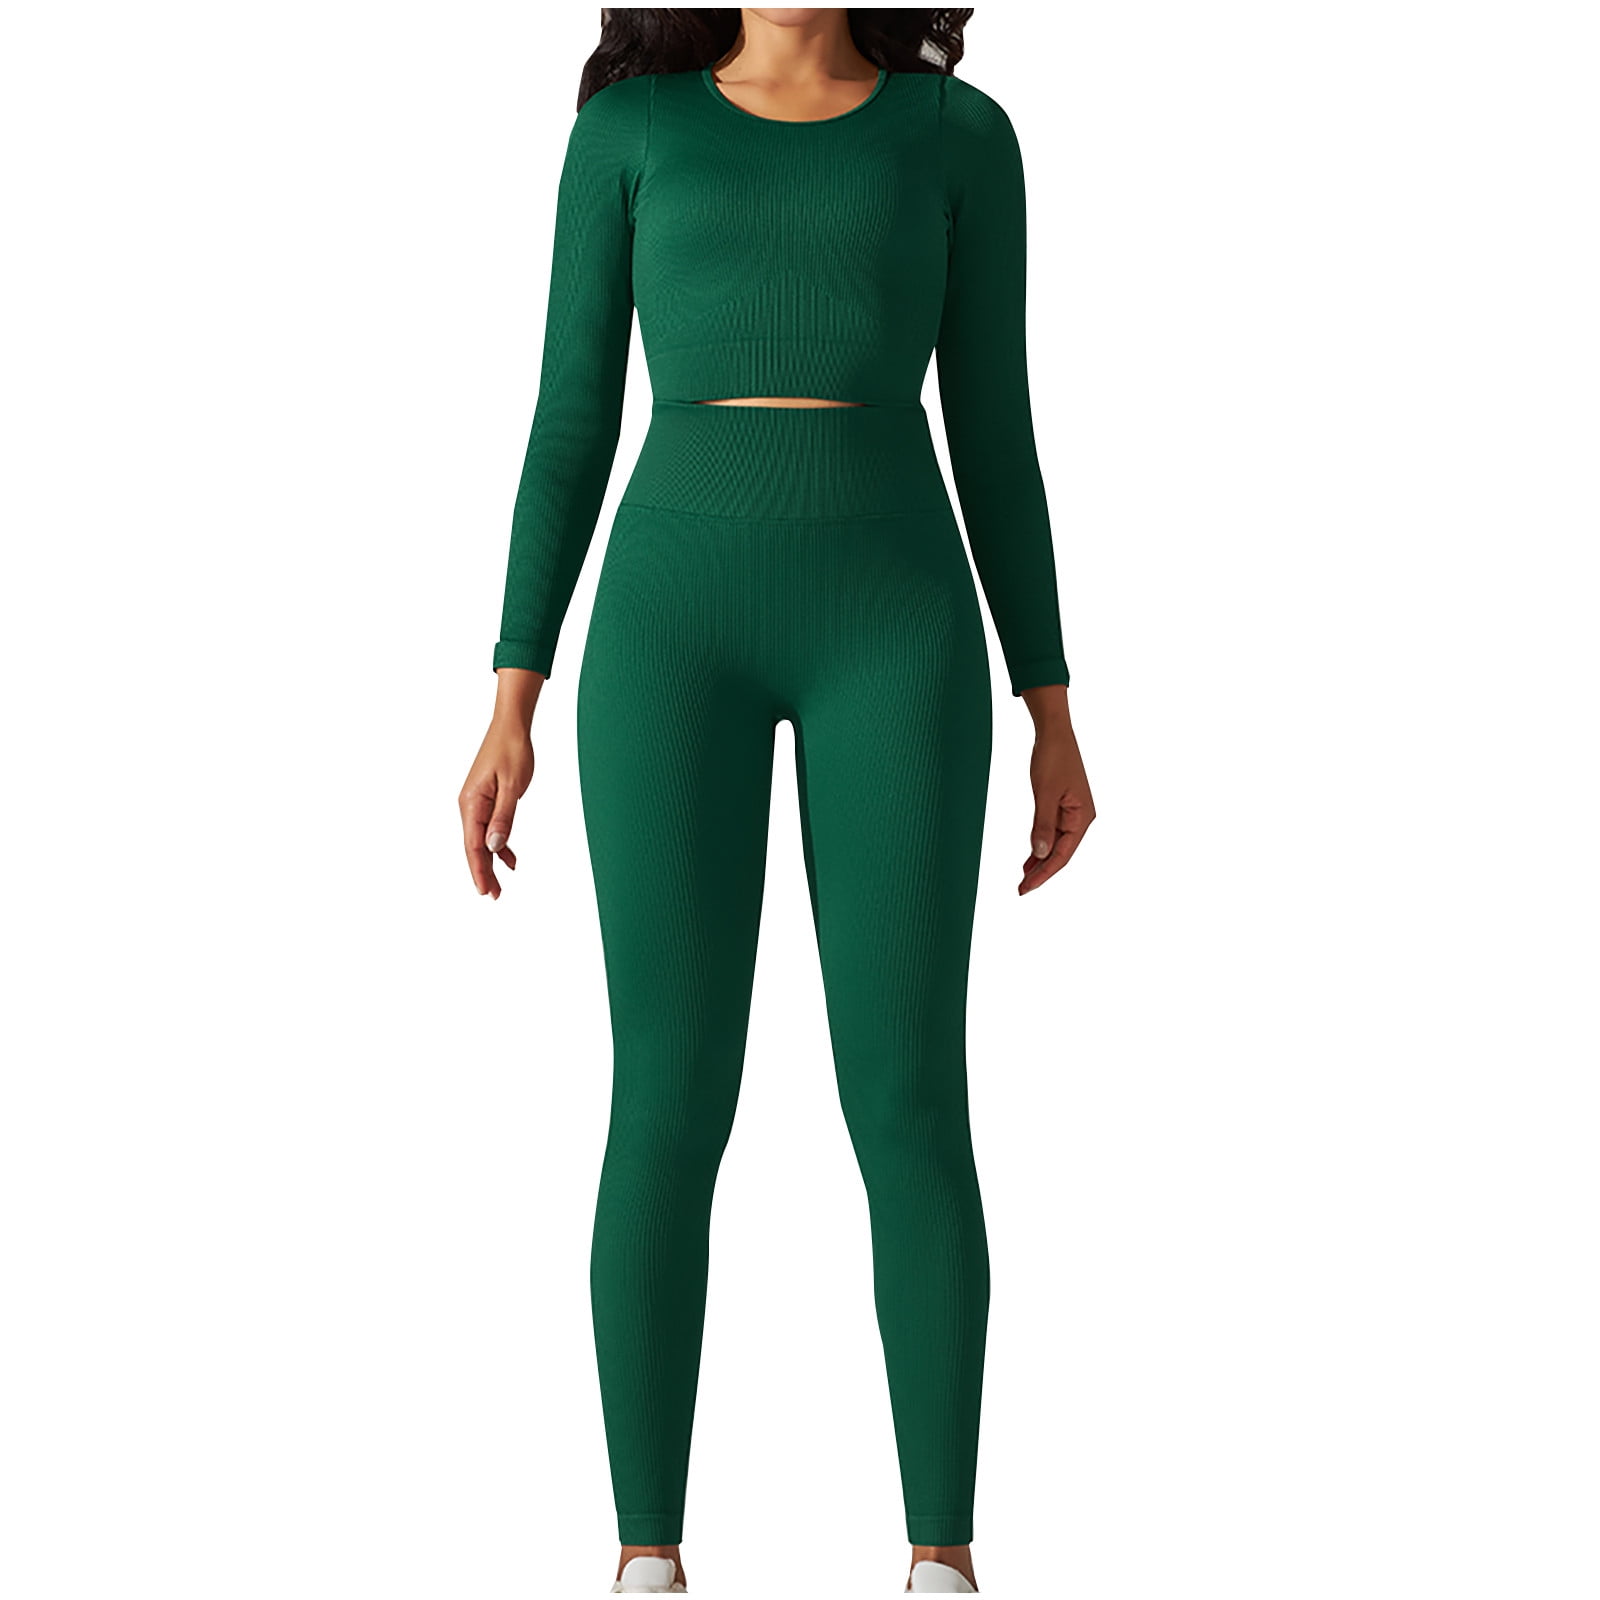 RYRJJ Seamless Workout Outfits for Women 2 Piece Ribbed Long Sleeve Crop Top  and Butt Lifting High Waist Leggings Matching Yoga Sets Sweatsuits(Brown,S)  